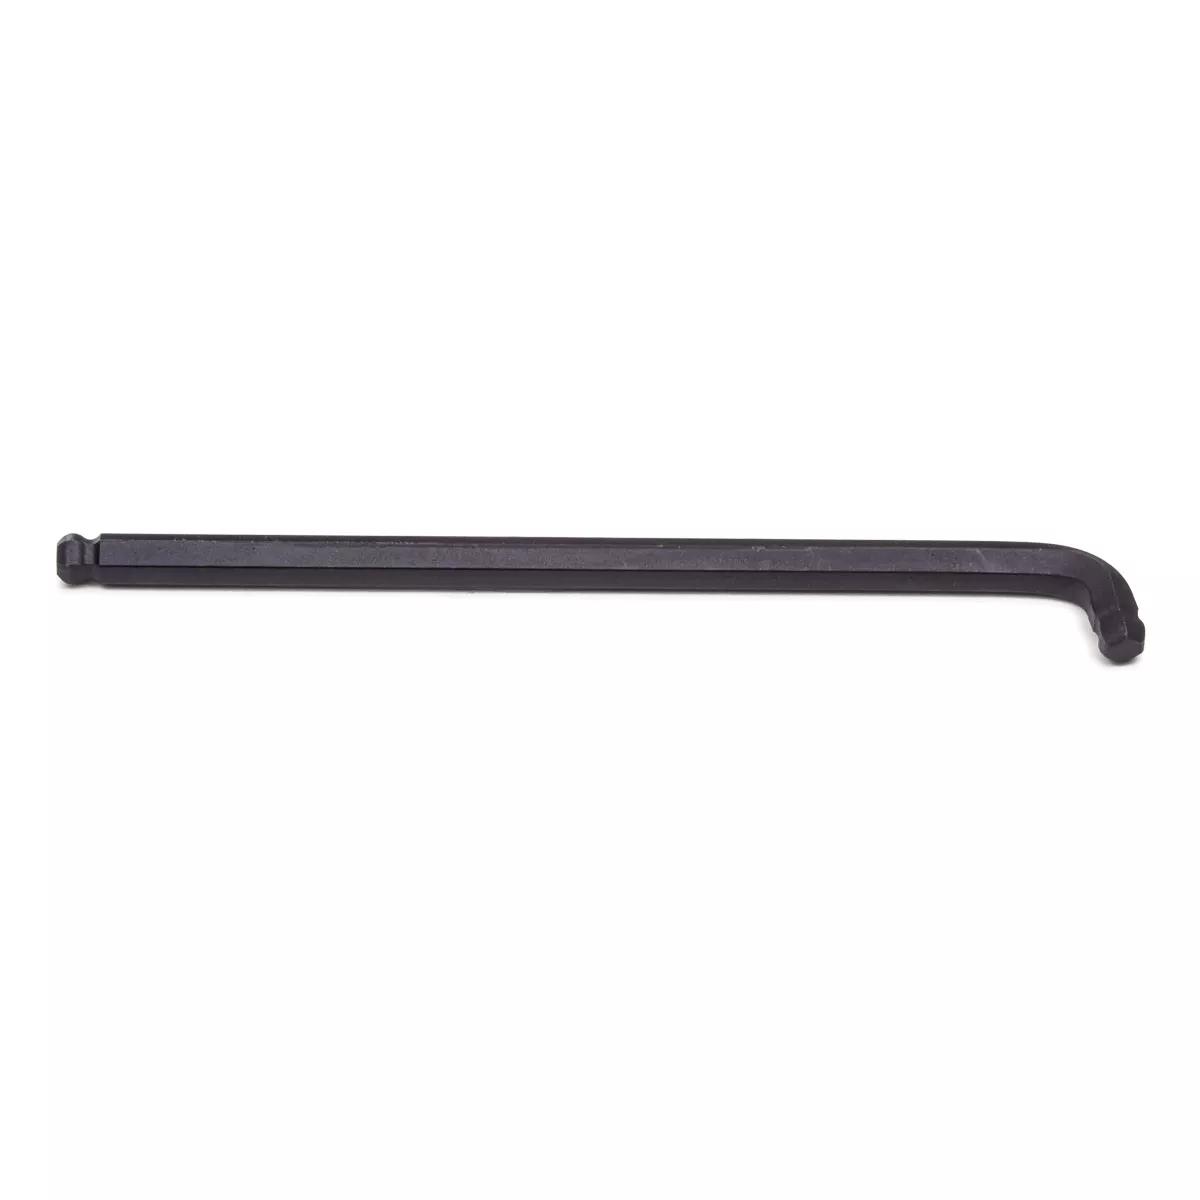 5/16" Dual Ball End Hex Key Wrench